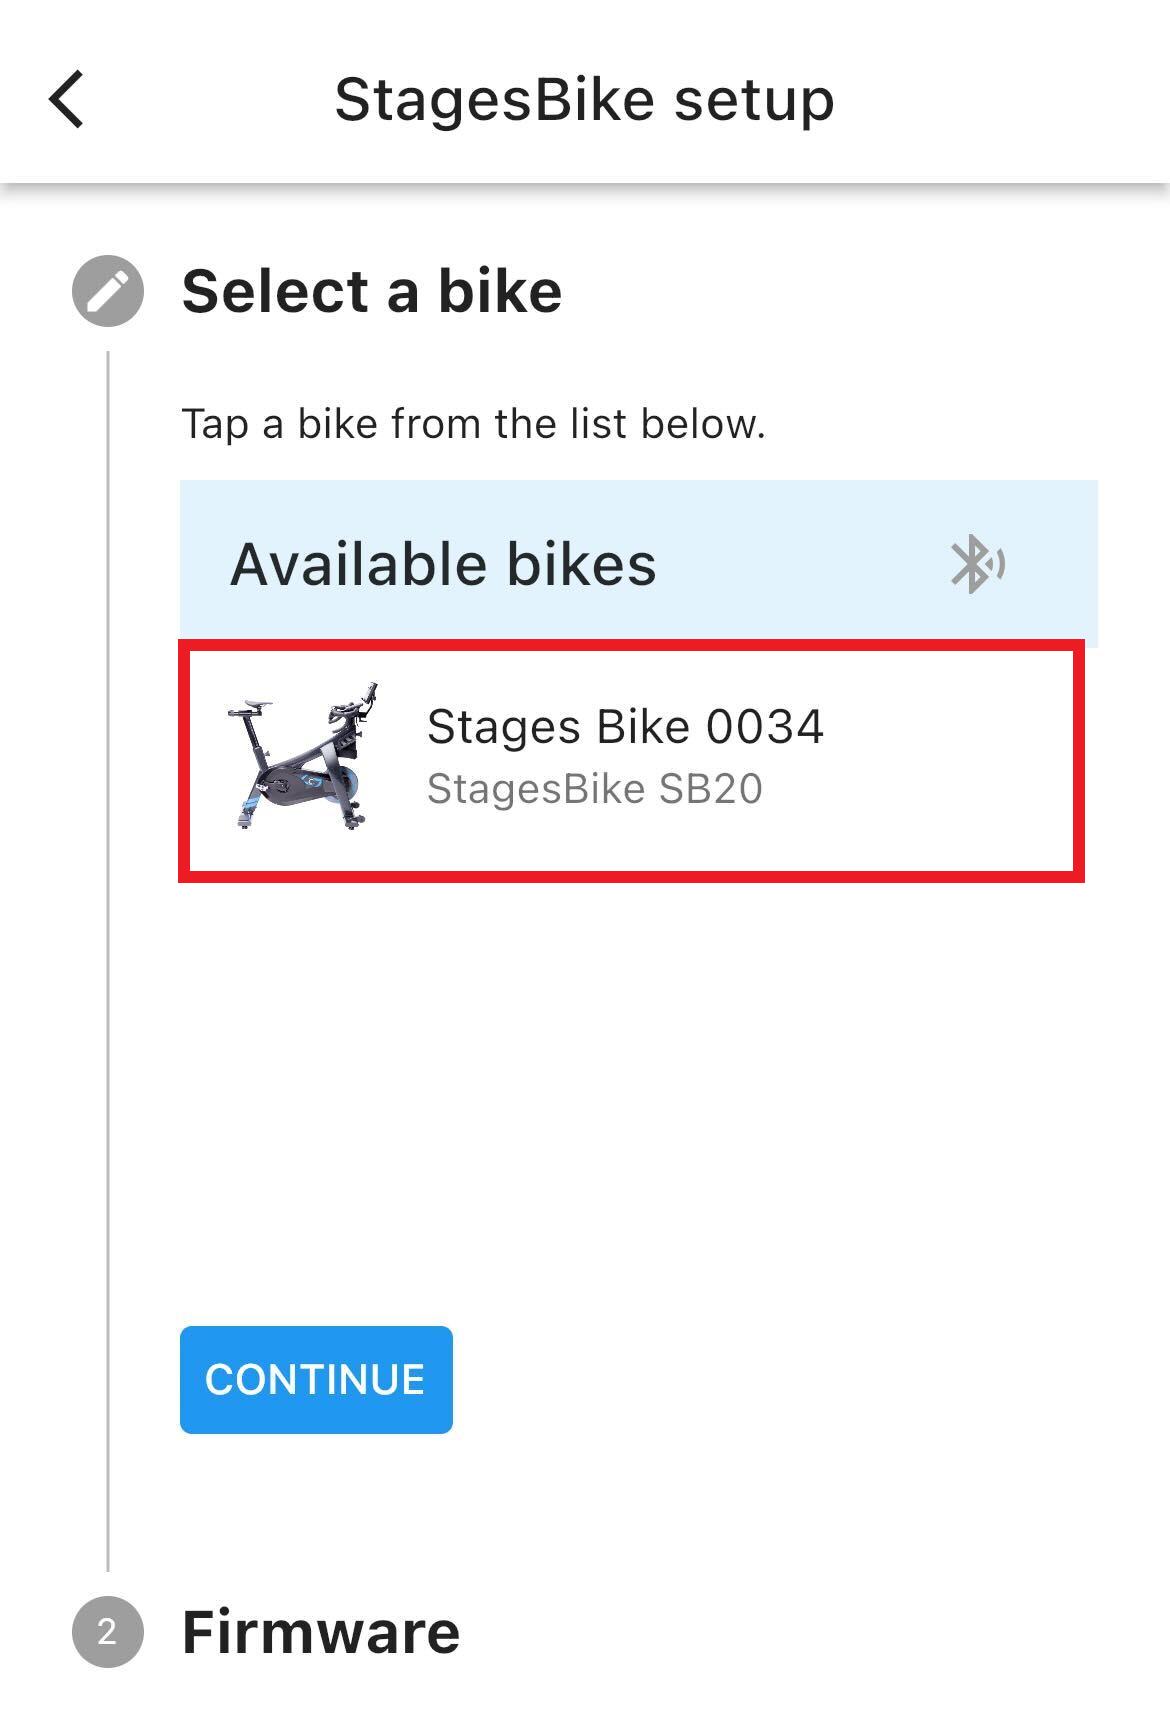 Available bikes with your StagesBike highlighted